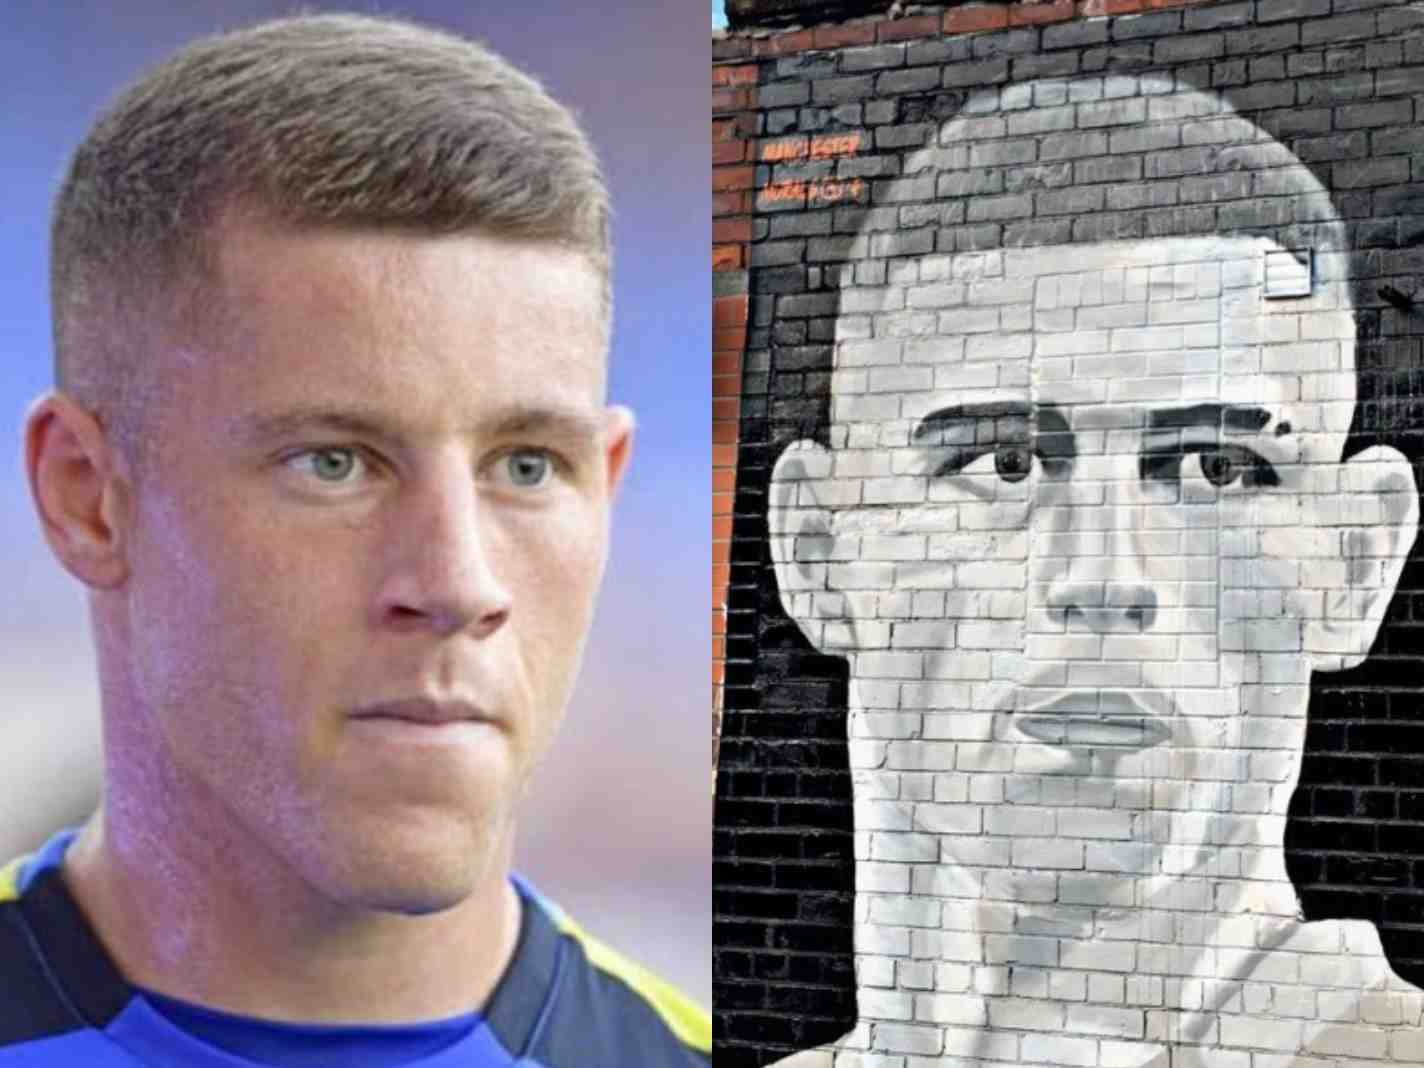 Fans point out new Phil Foden Mural looks like Ross Barkley instead of him